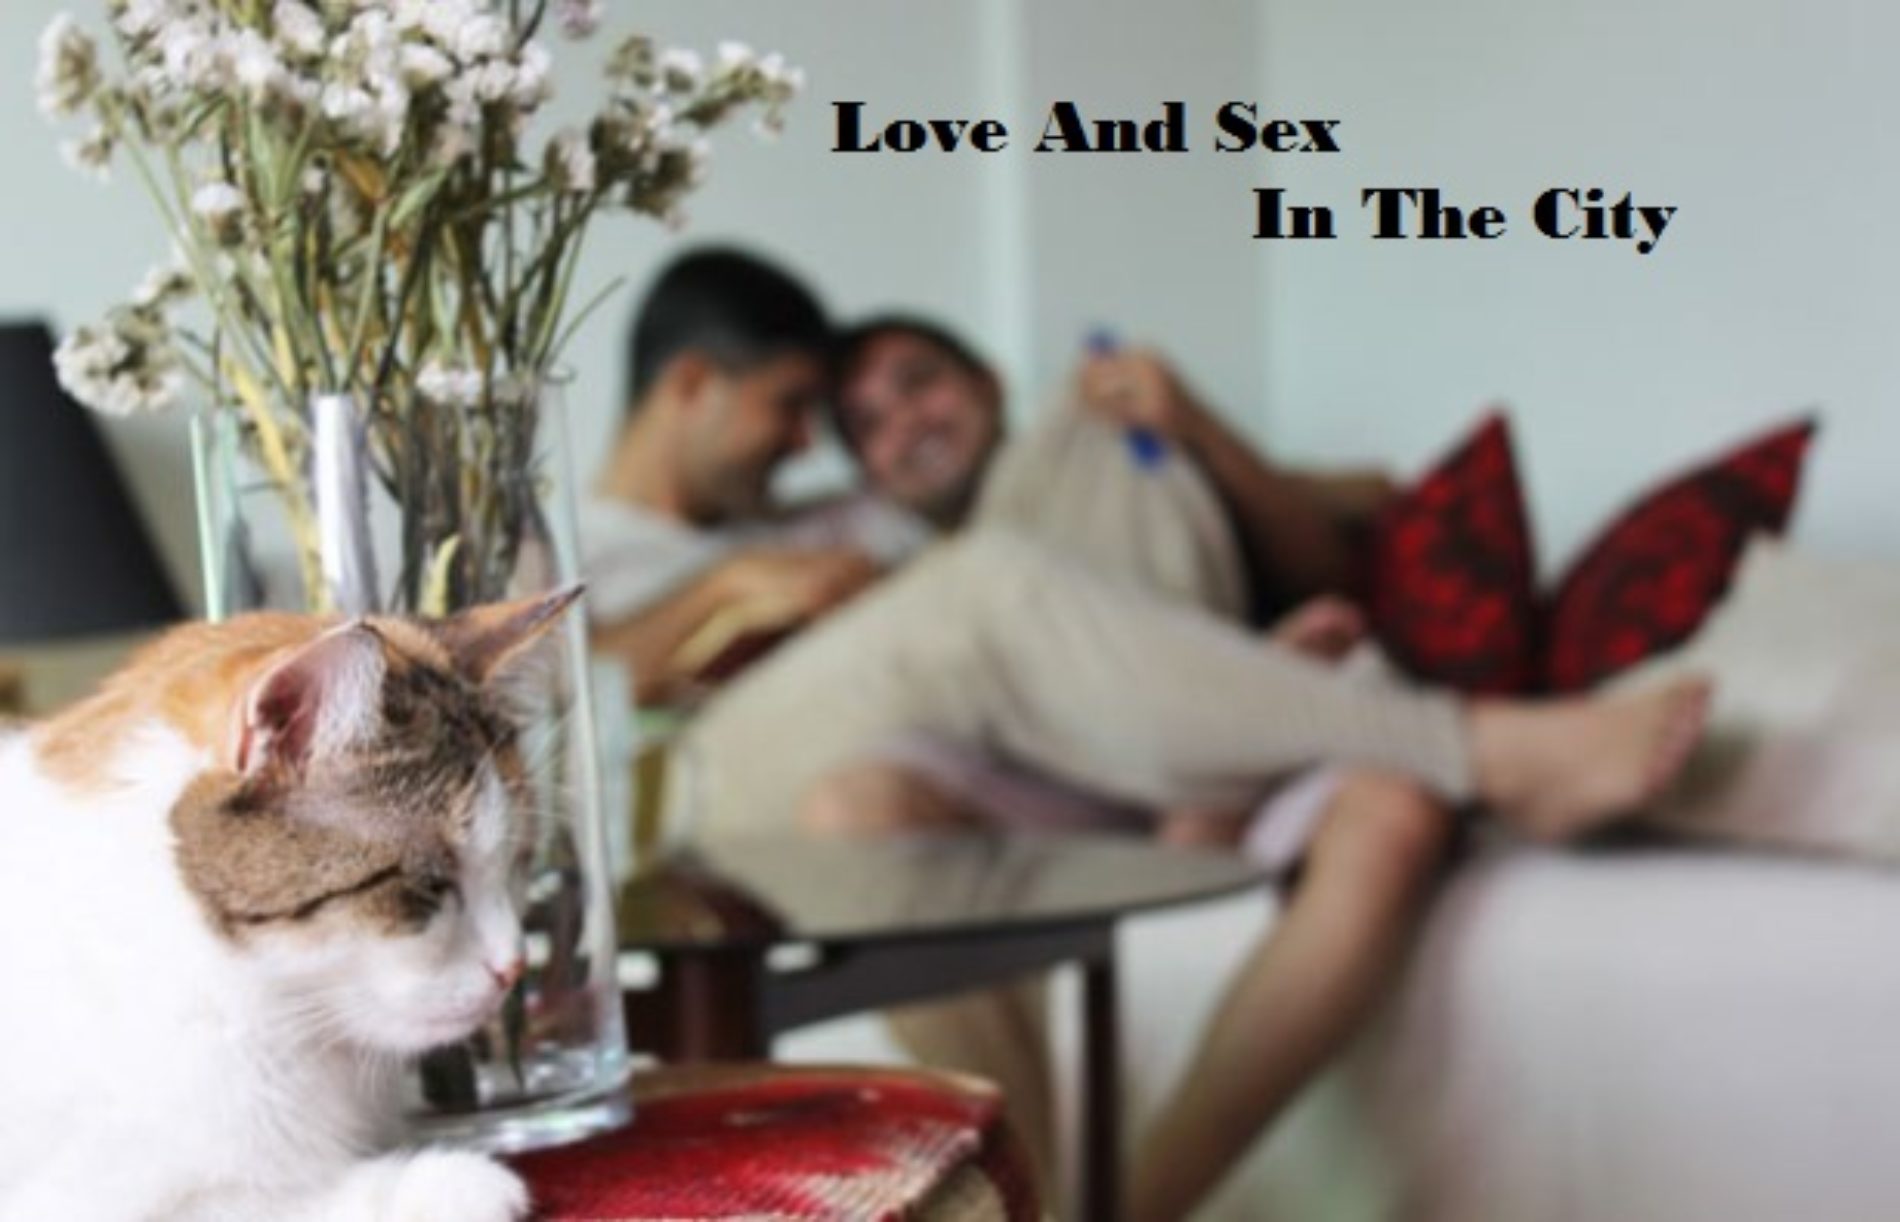 LOVE AND SEX IN THE CITY (Episode 44)